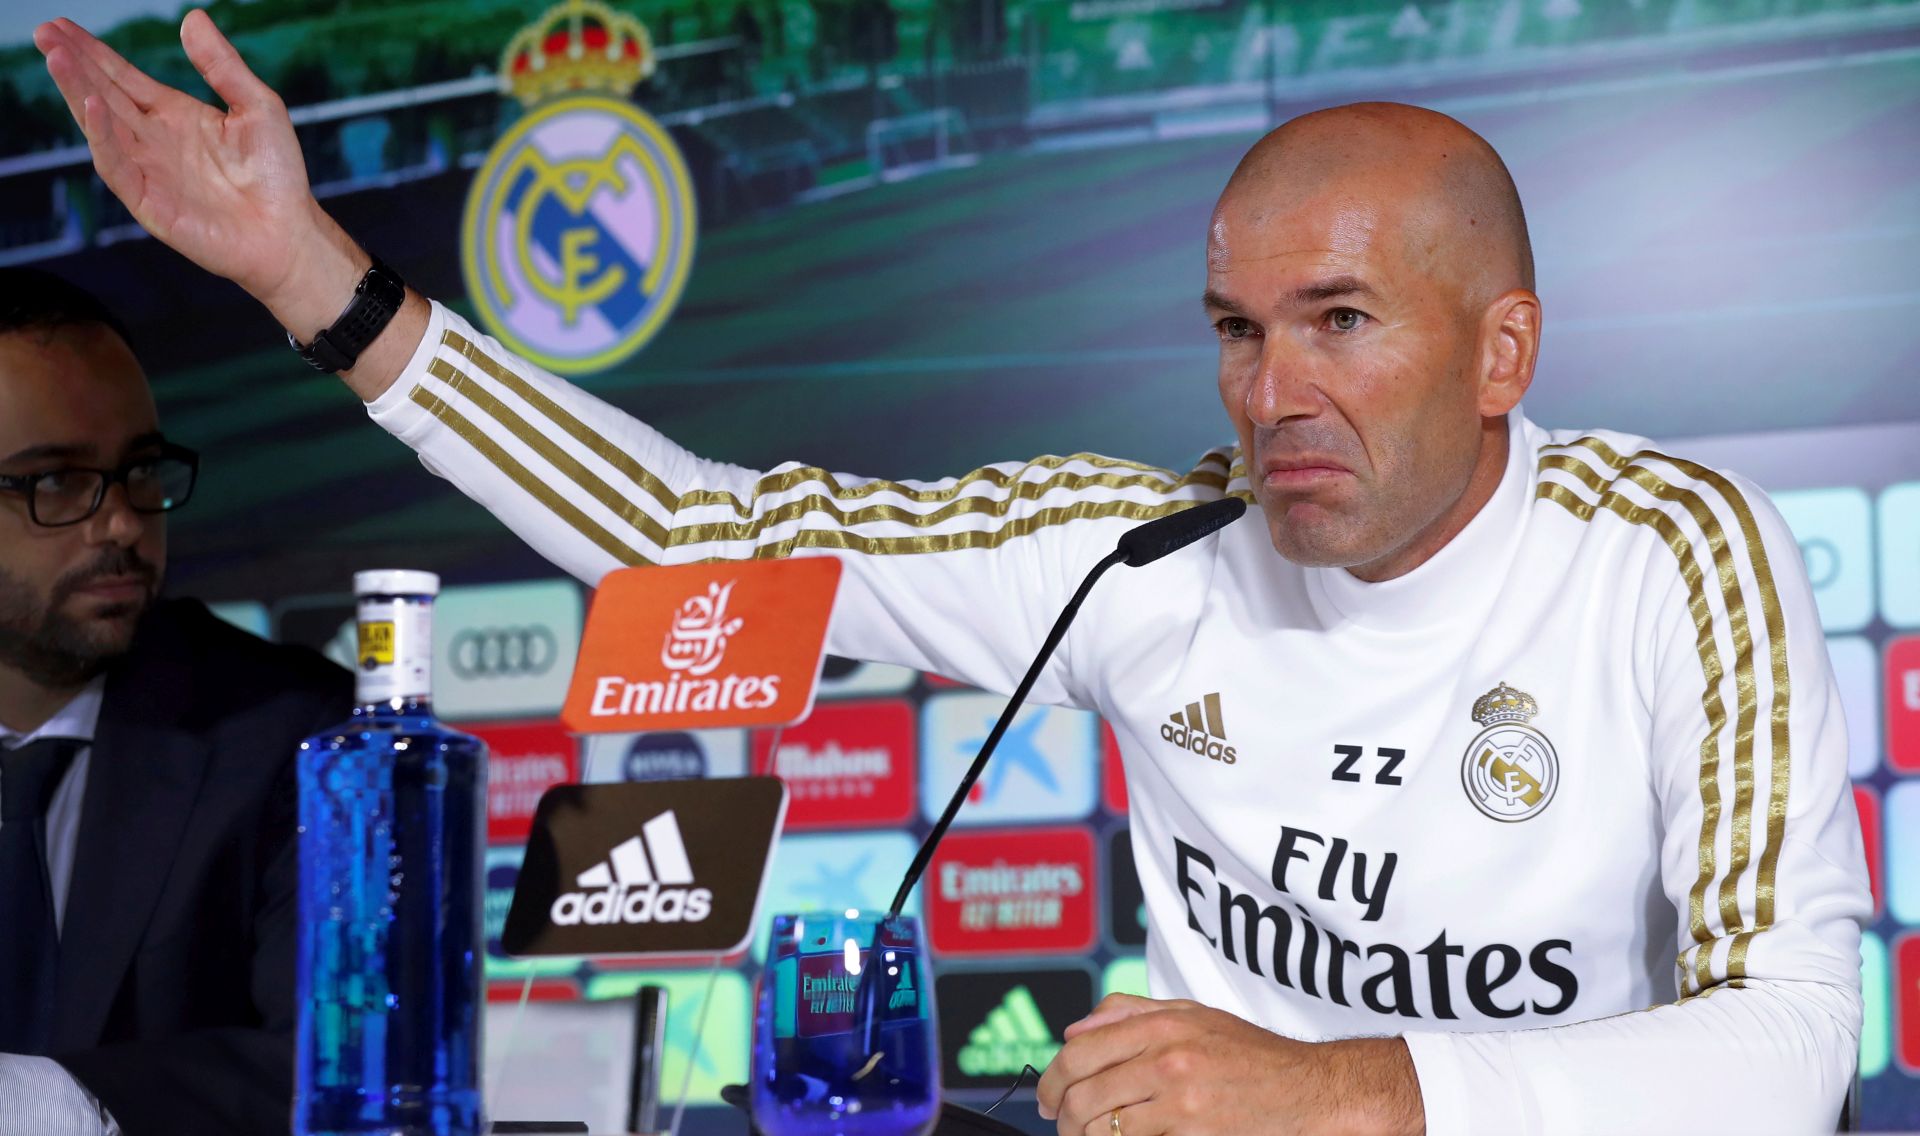 epa07839072 Head coach of Real Madrid, Zinedine Zidane, holds a press conference prior to a training session at the club's Valdebebas spors facility in Madrid, Spain, 13 September 2019. Real Madrid will face Levante UD in a Spanish LaLiga soccer match on 14 September.  EPA/Chema Moya